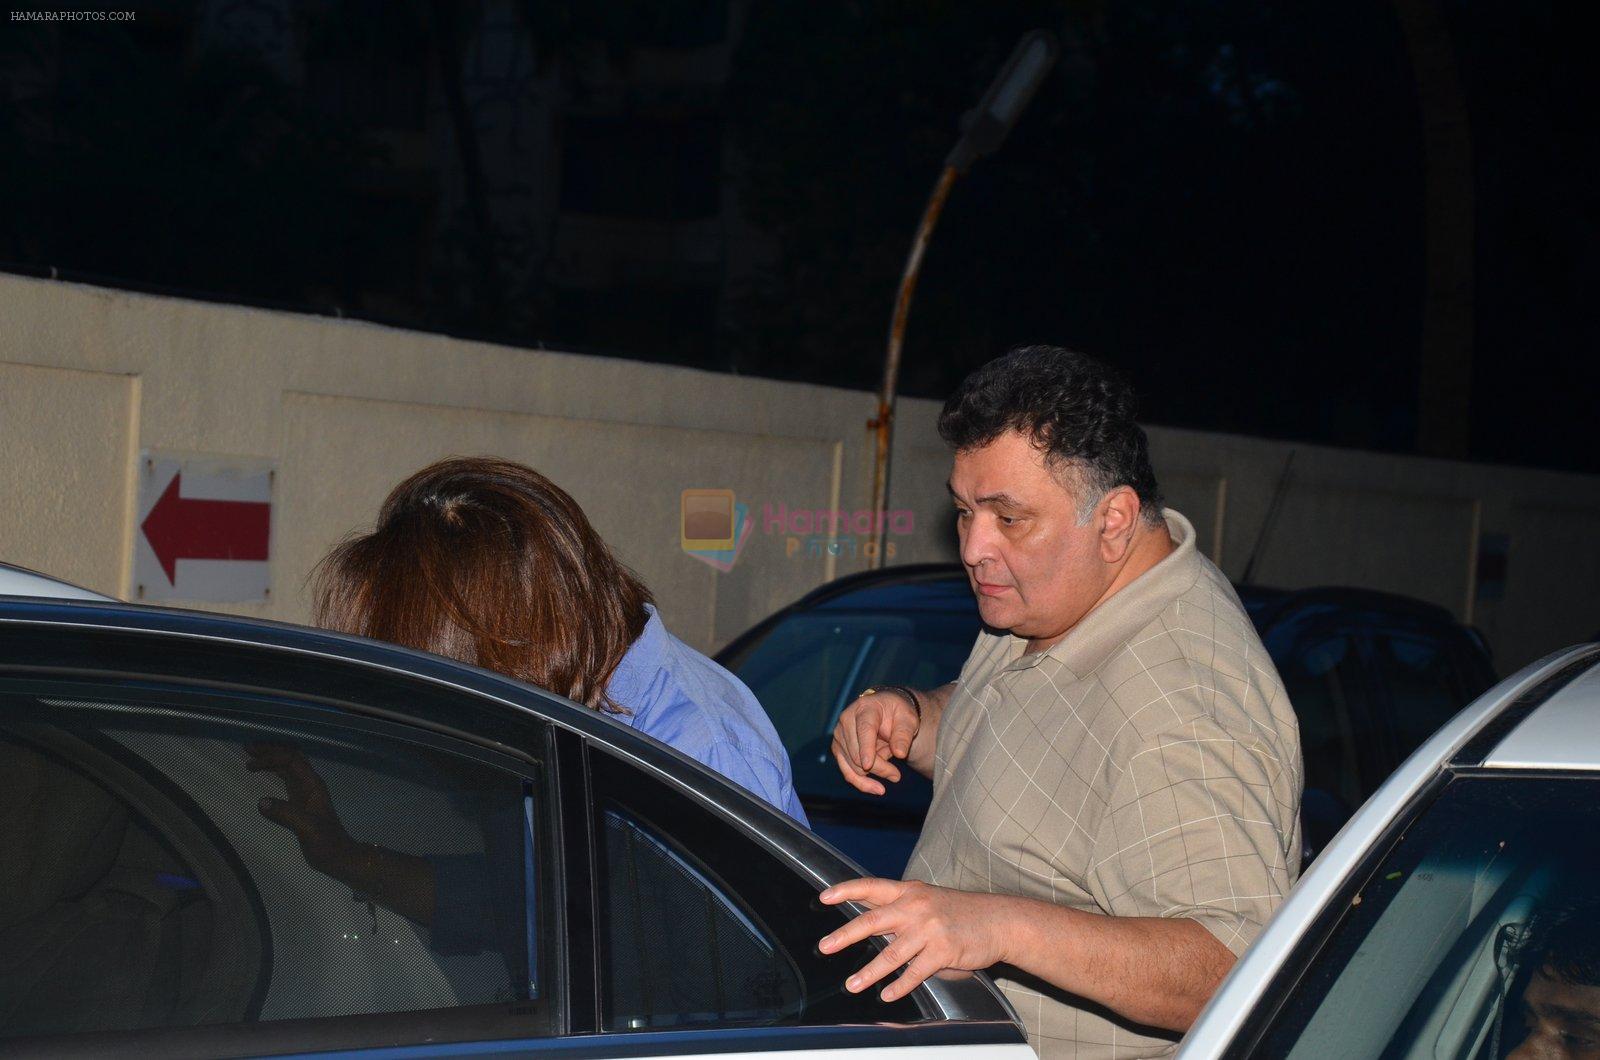 Rishi Kapoor and Neetu Singh snapped at PVR on 10th July 2016